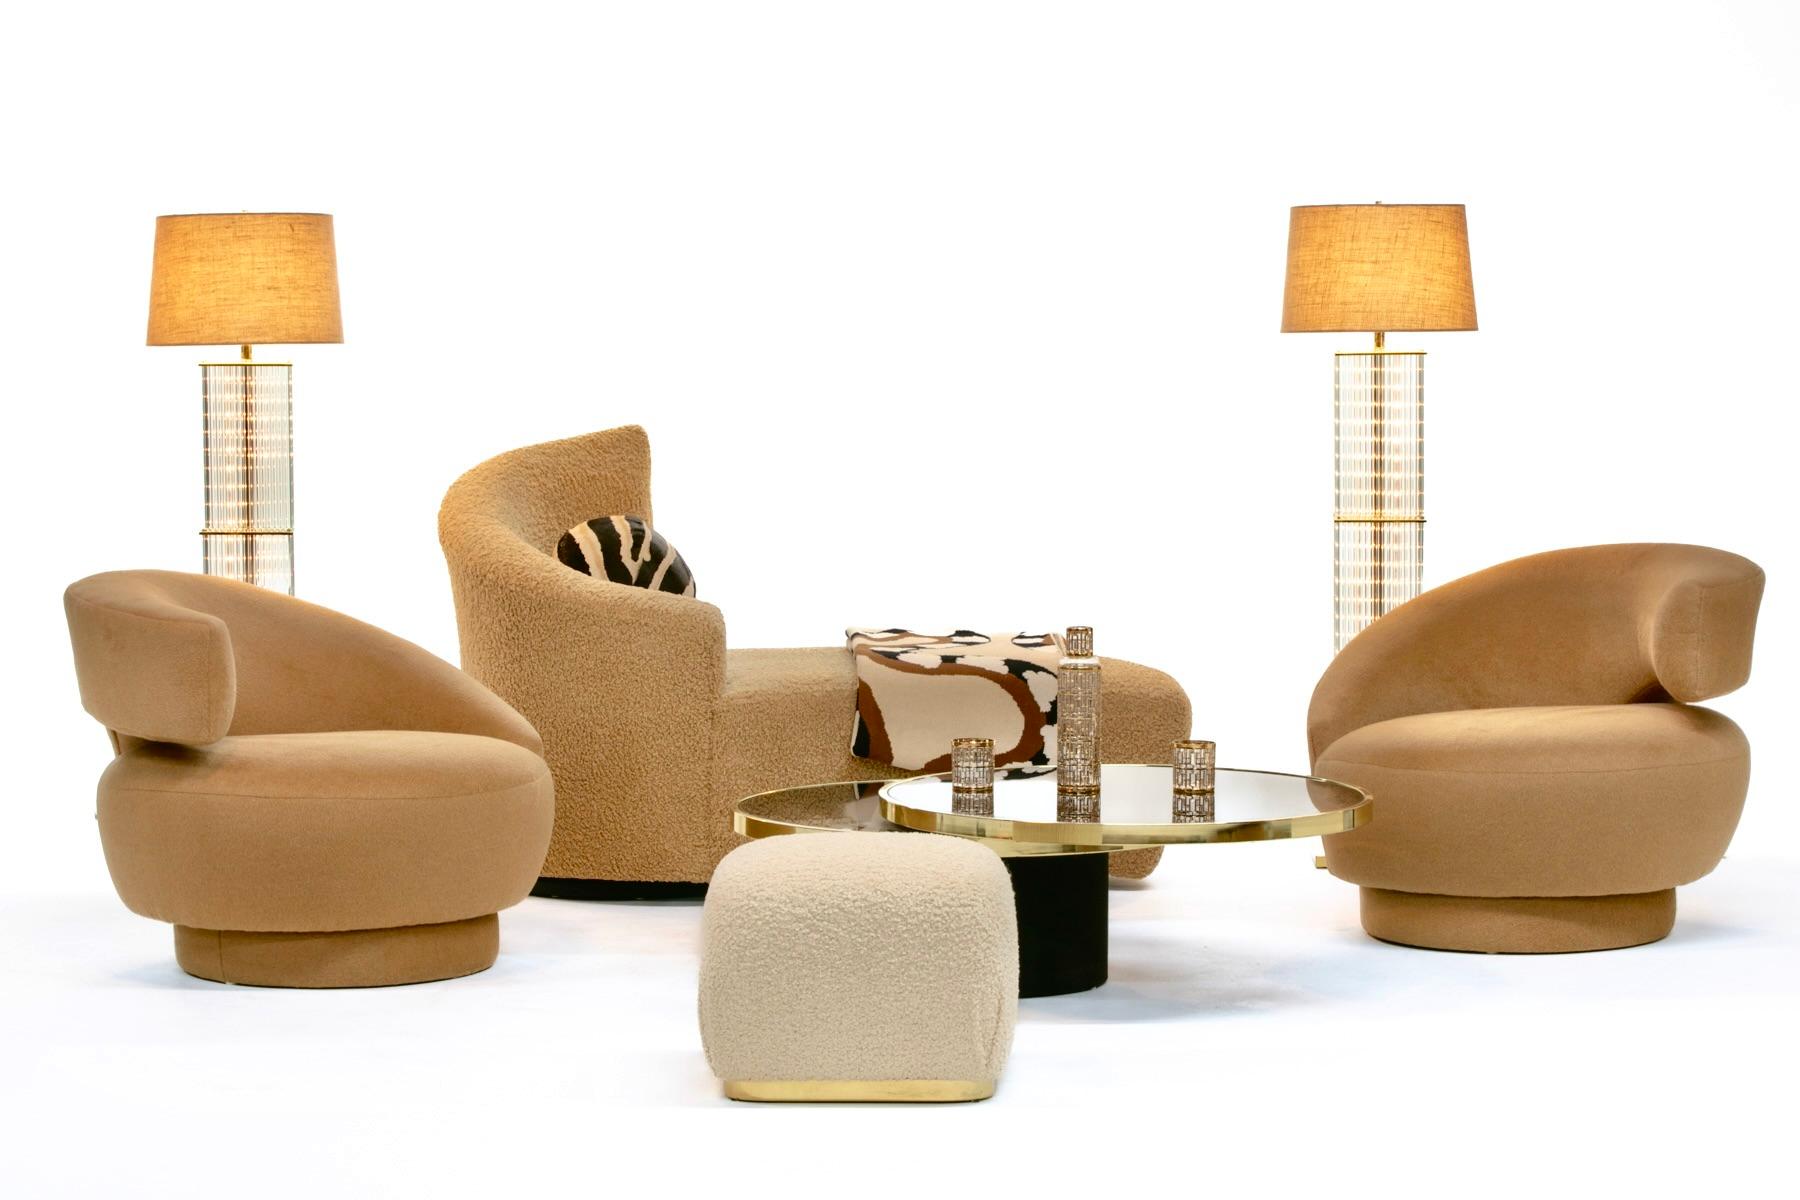 Goodness aren’t these Caterpillar Swivel Chairs by Vladimir Kagan the most stunning sculptural and complimentary shape you’ve seen. As enticing as chocolate truffles, these Kagan swivel chairs deliver the luxurious sitting experience you would